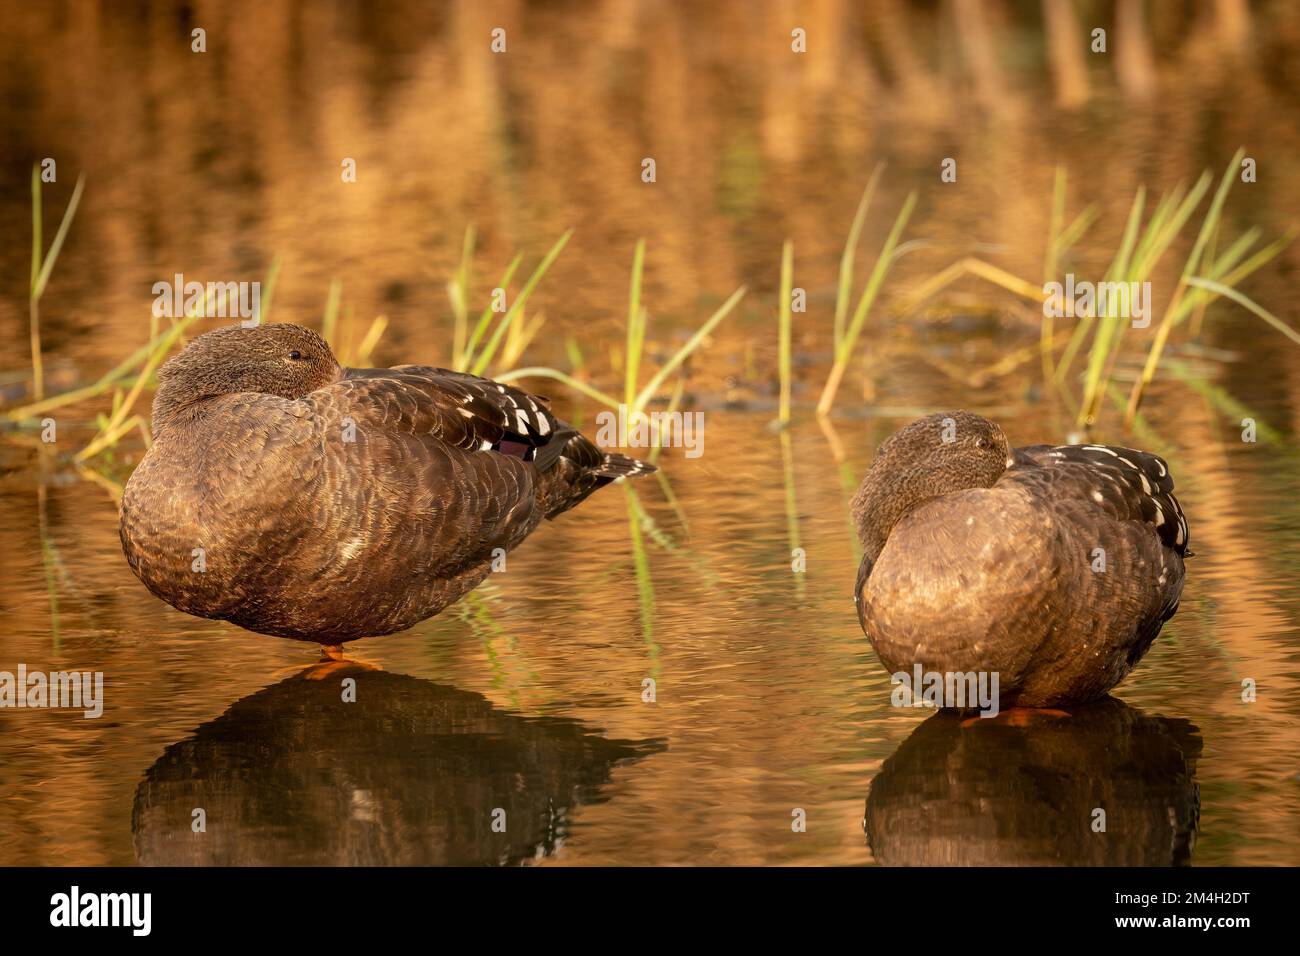 A beautiful shot of two African black ducks in a lake Stock Photo